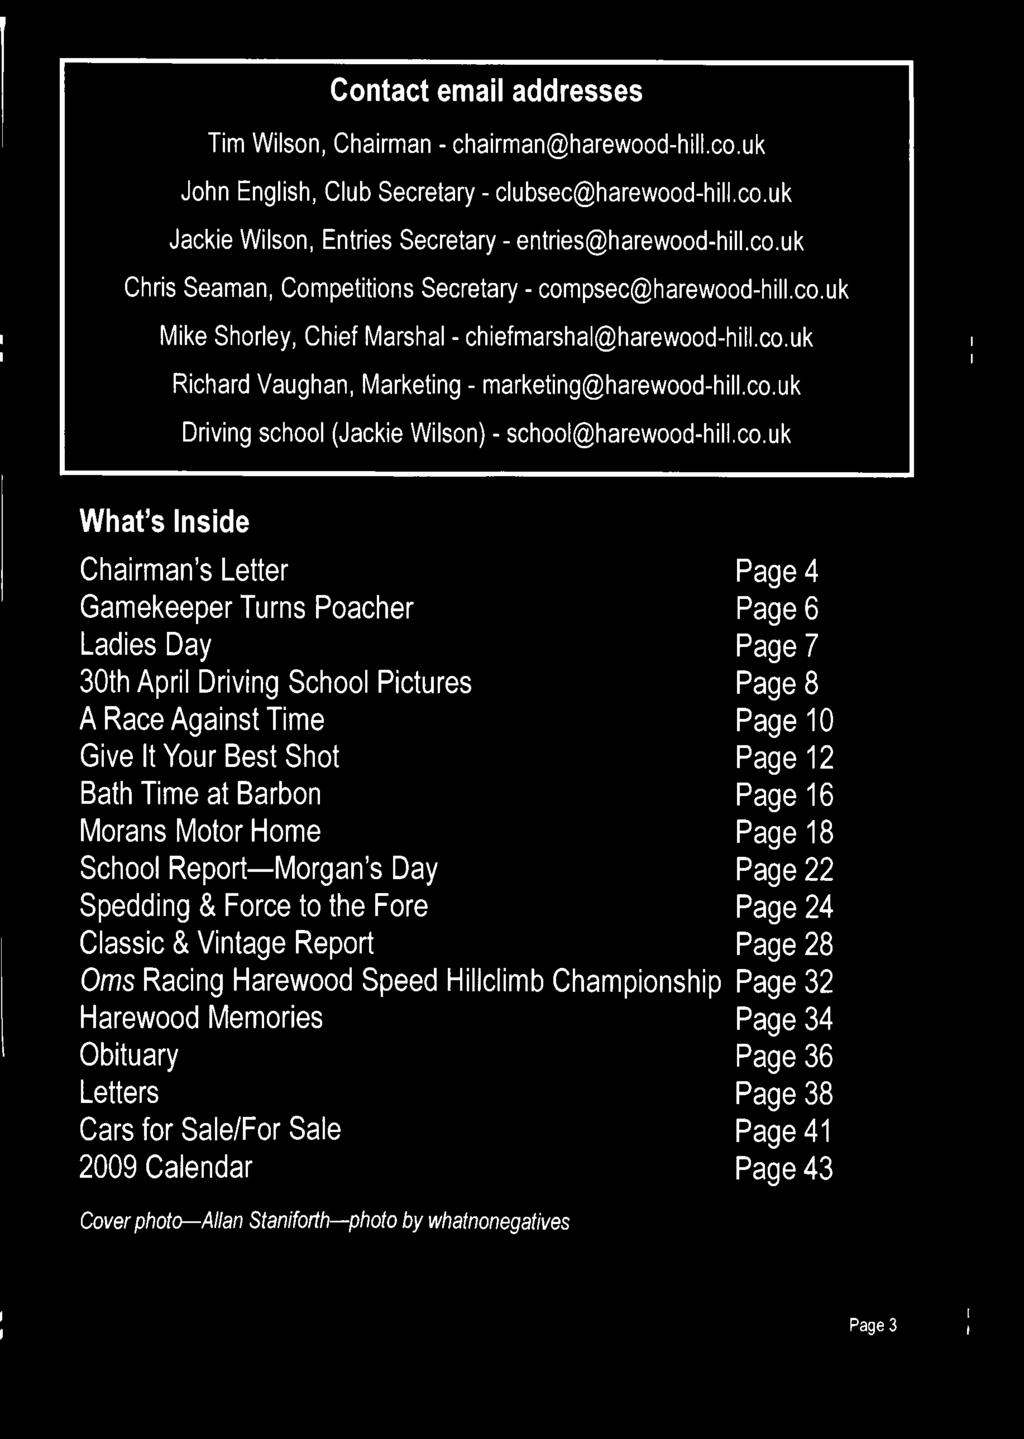 s Inside Chairman s Letter Page 4 Gamekeeper Turns Poacher Page 6 Ladies Day Page 7 30th April Driving School Pictures Page 8 A Race Against Time Page 10 Give It Your Best Shot Page 12 Bath Time at